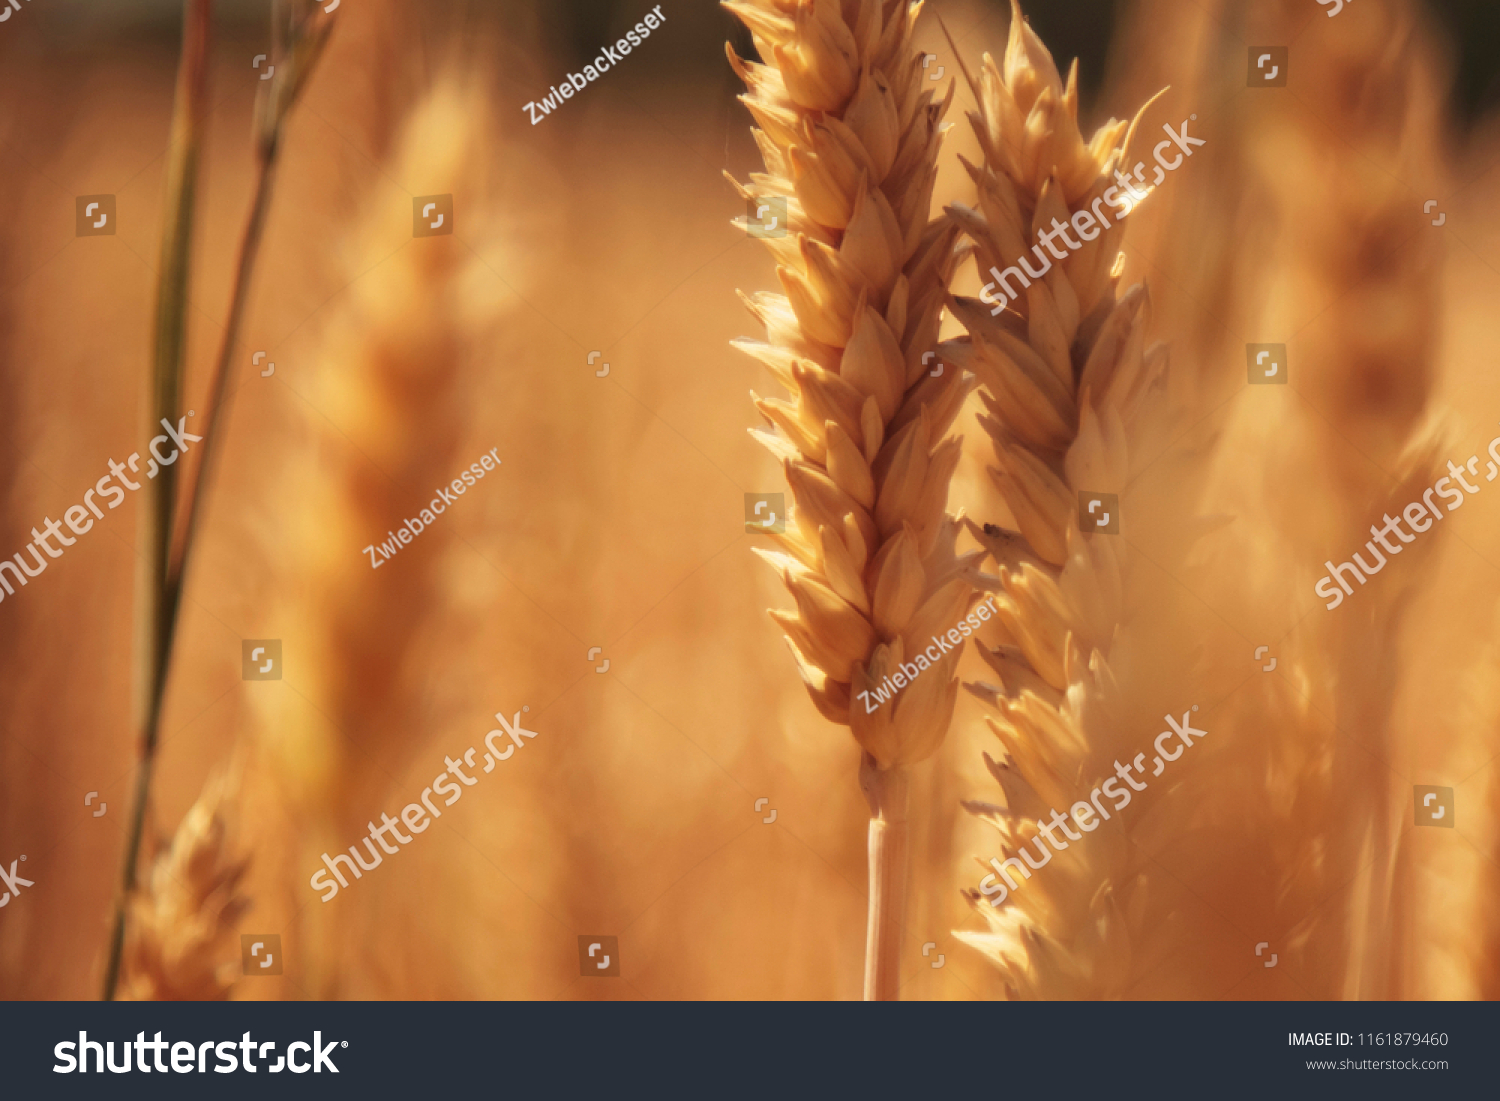 barley field background (agriculture, agronomy, industry) #1161879460